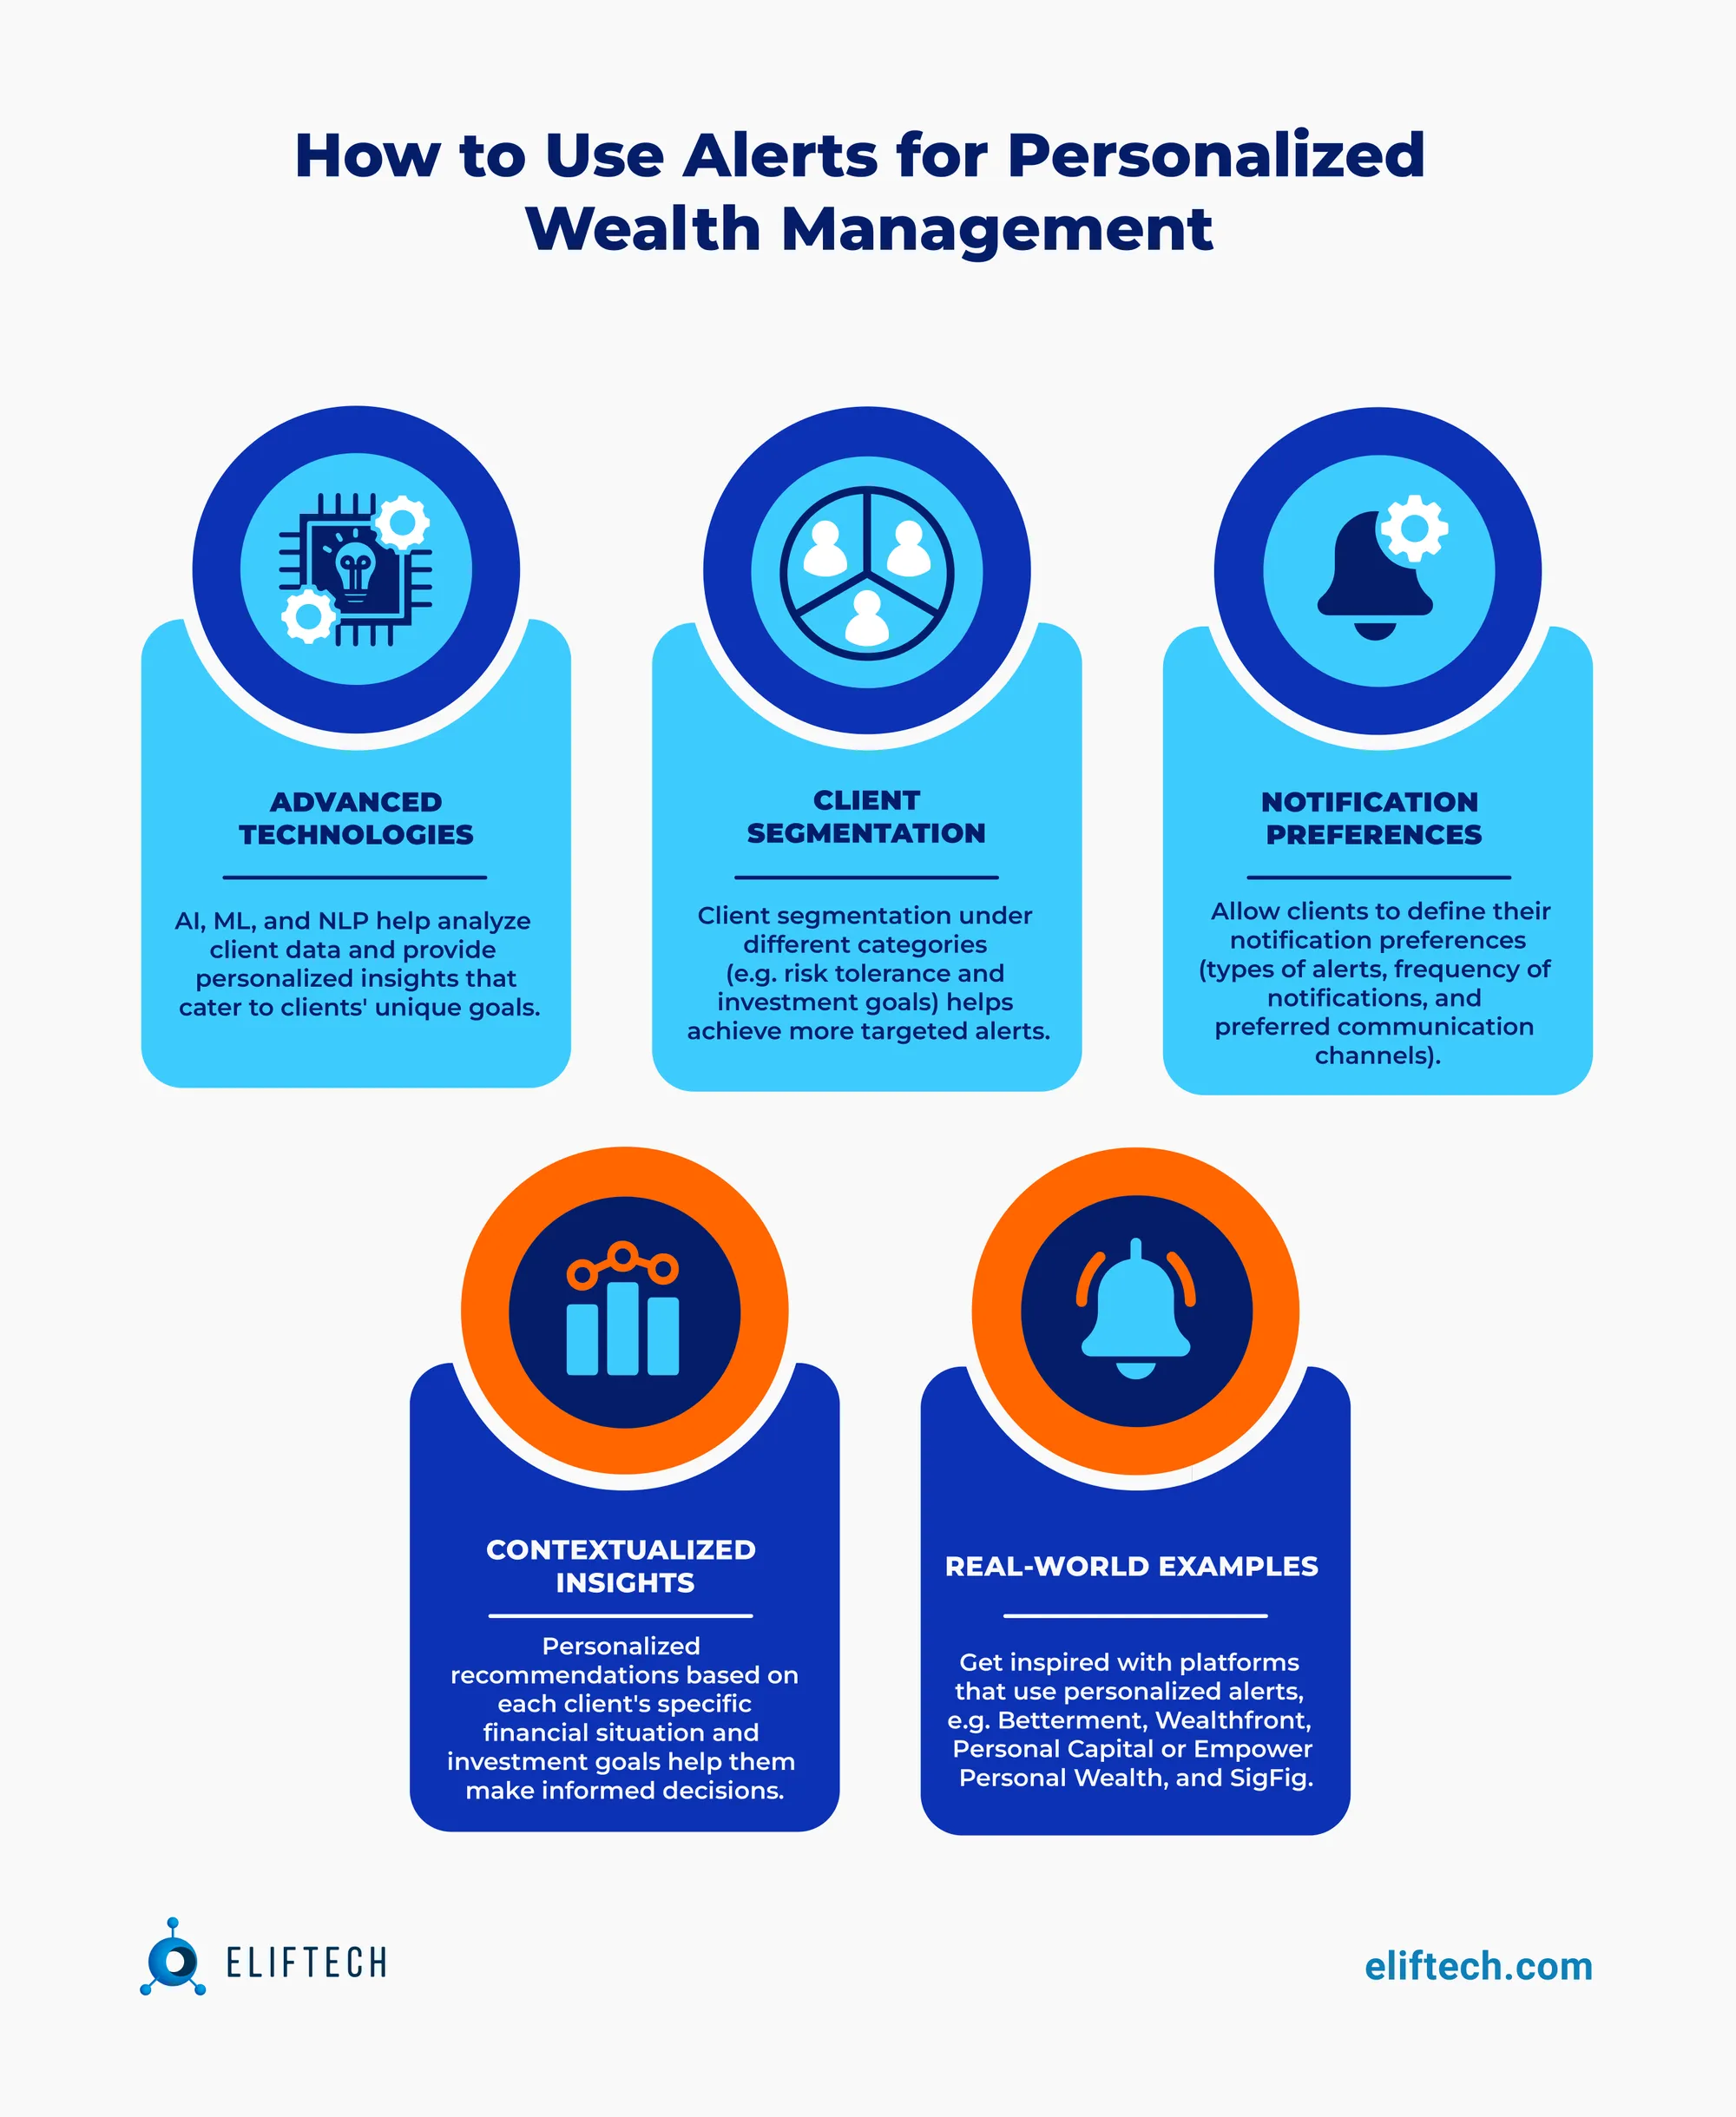 How to Achieve Personalized Wealth Management with Alerts?